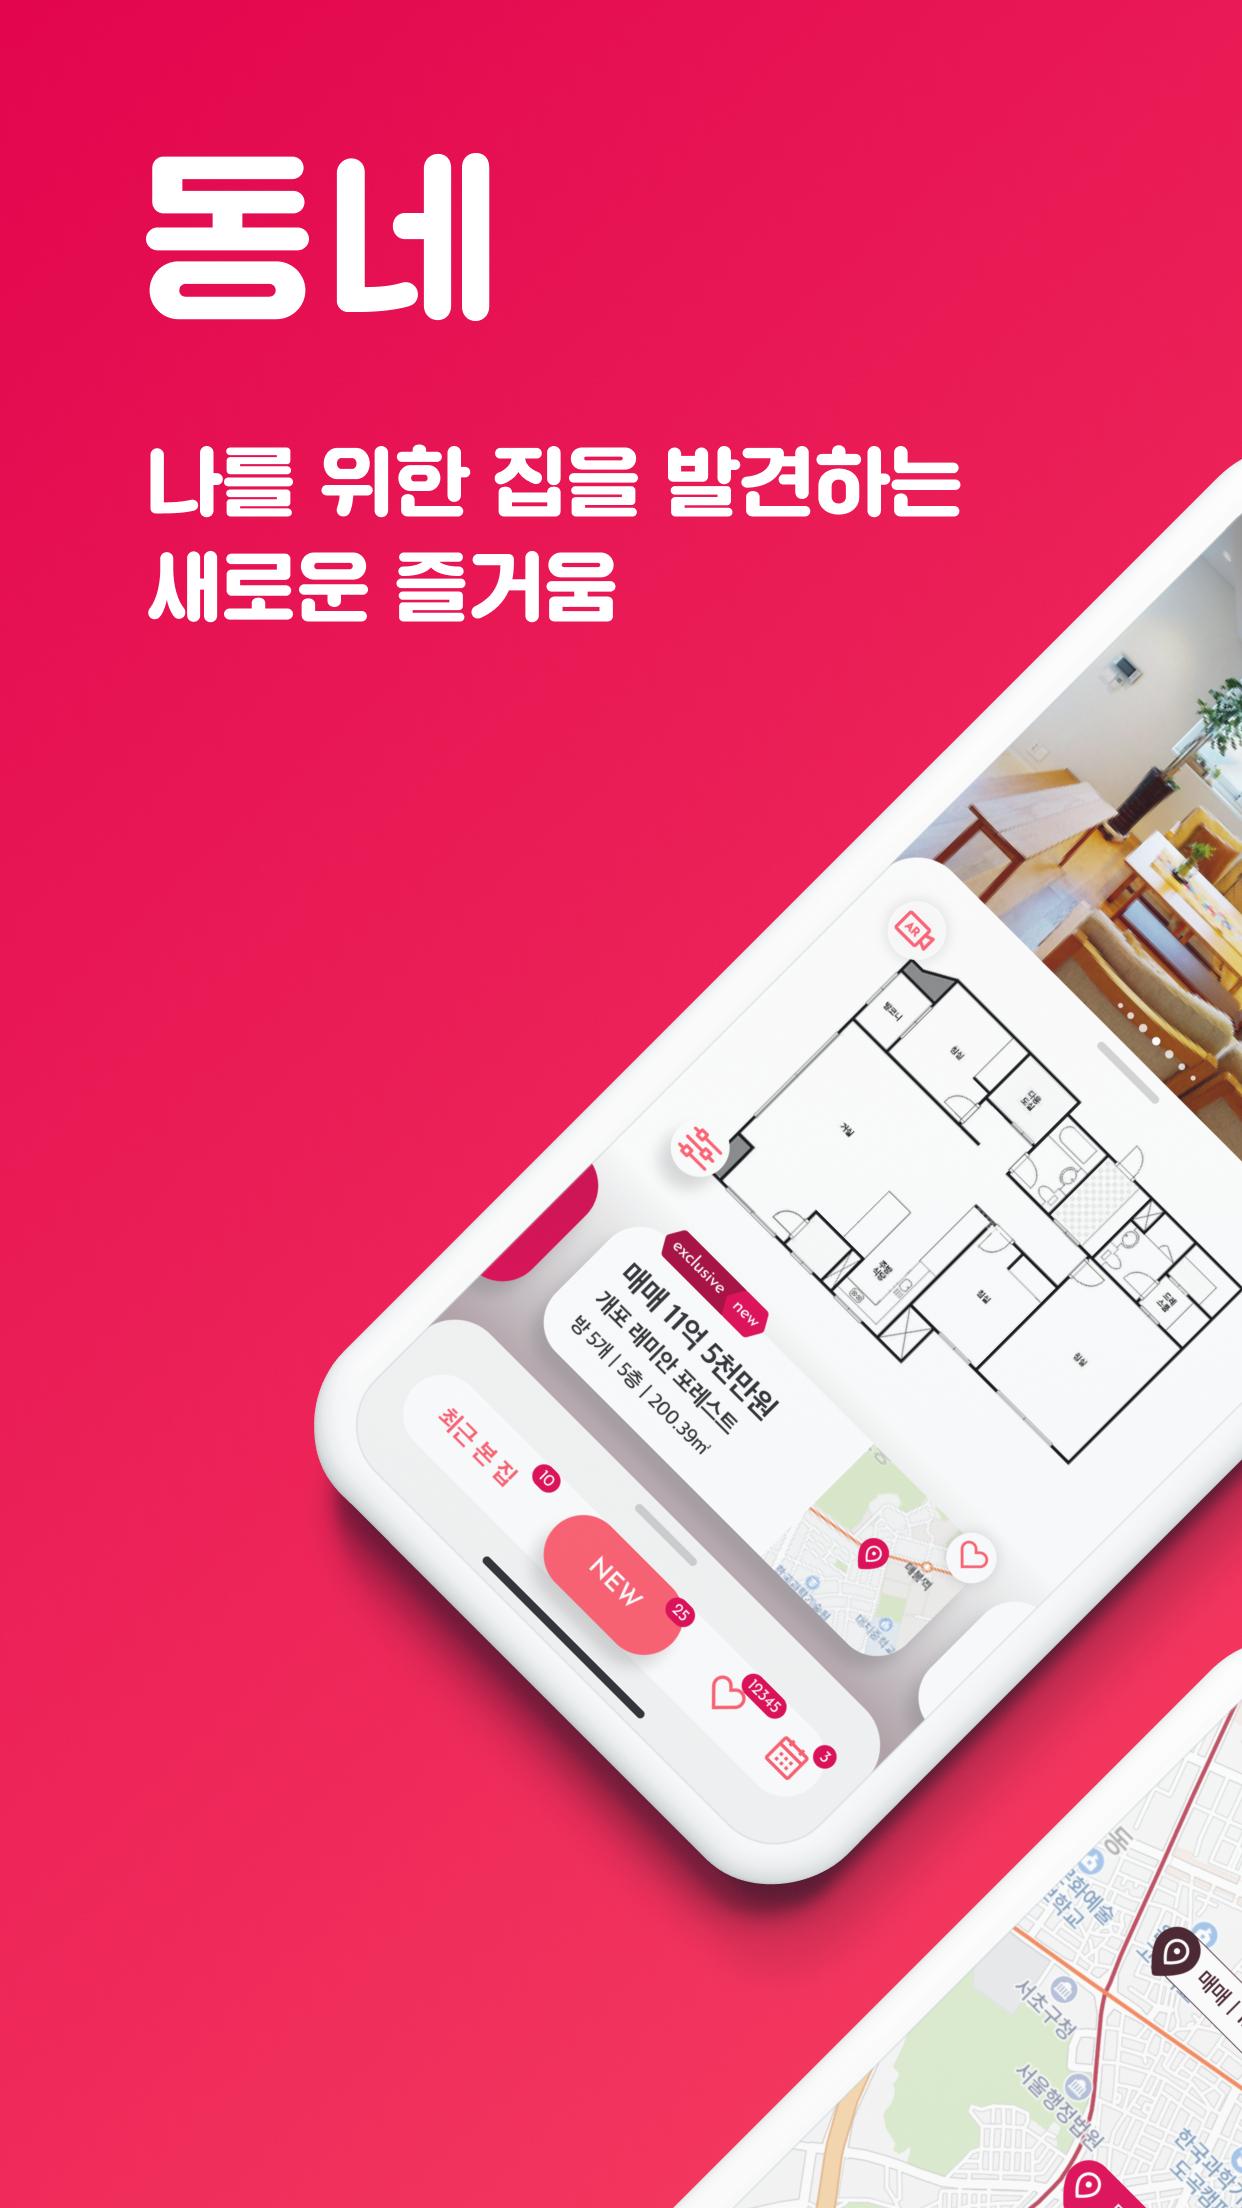 Dongnae Real Estate: Find Your Home 1.0.2 Screenshot 1